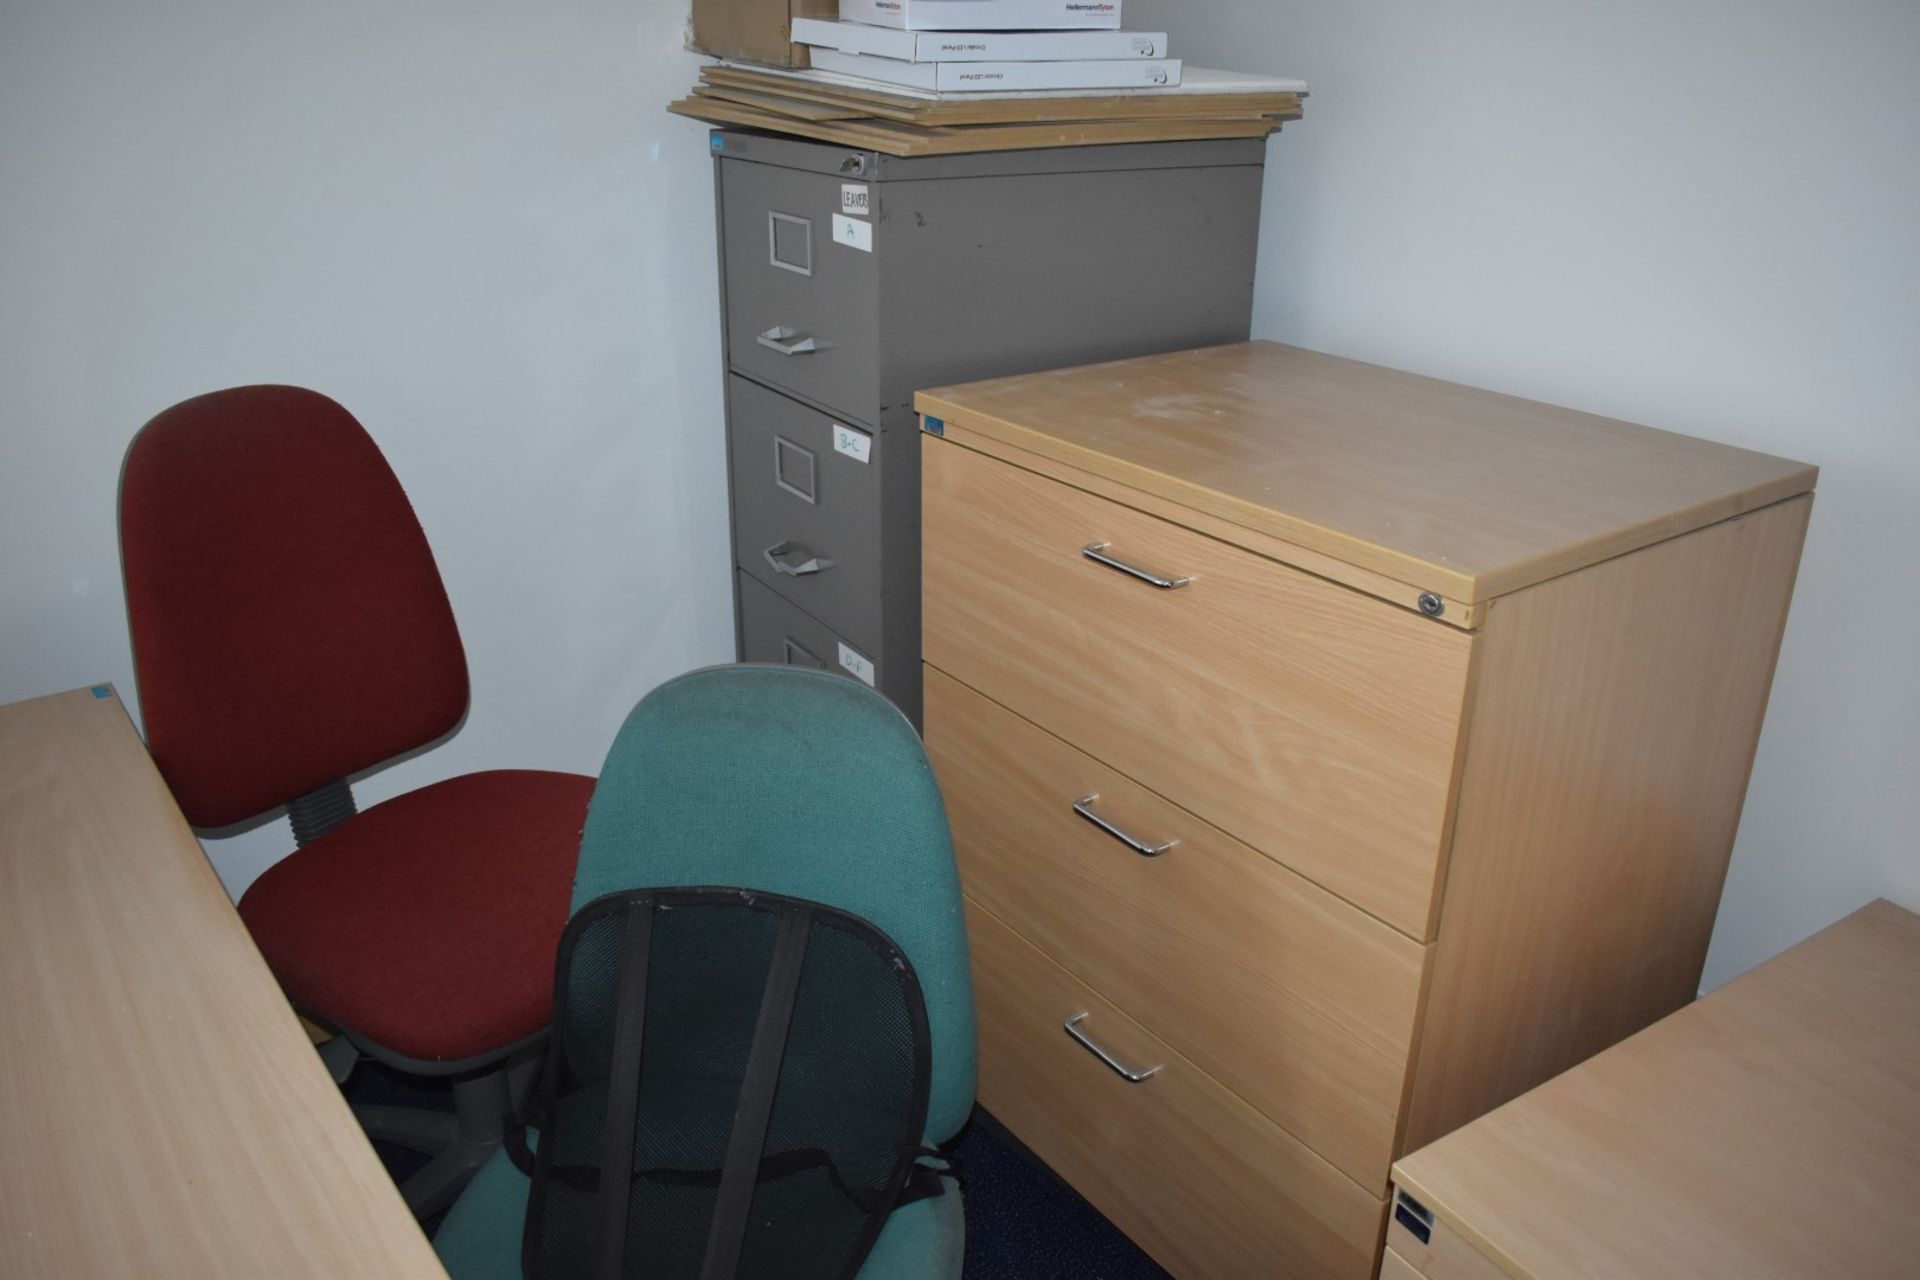 1 x Assorted Collection of Office Furniture - Includes 2 x 160cm Office Desks, 3 x Swivel Chairs, - Image 4 of 7